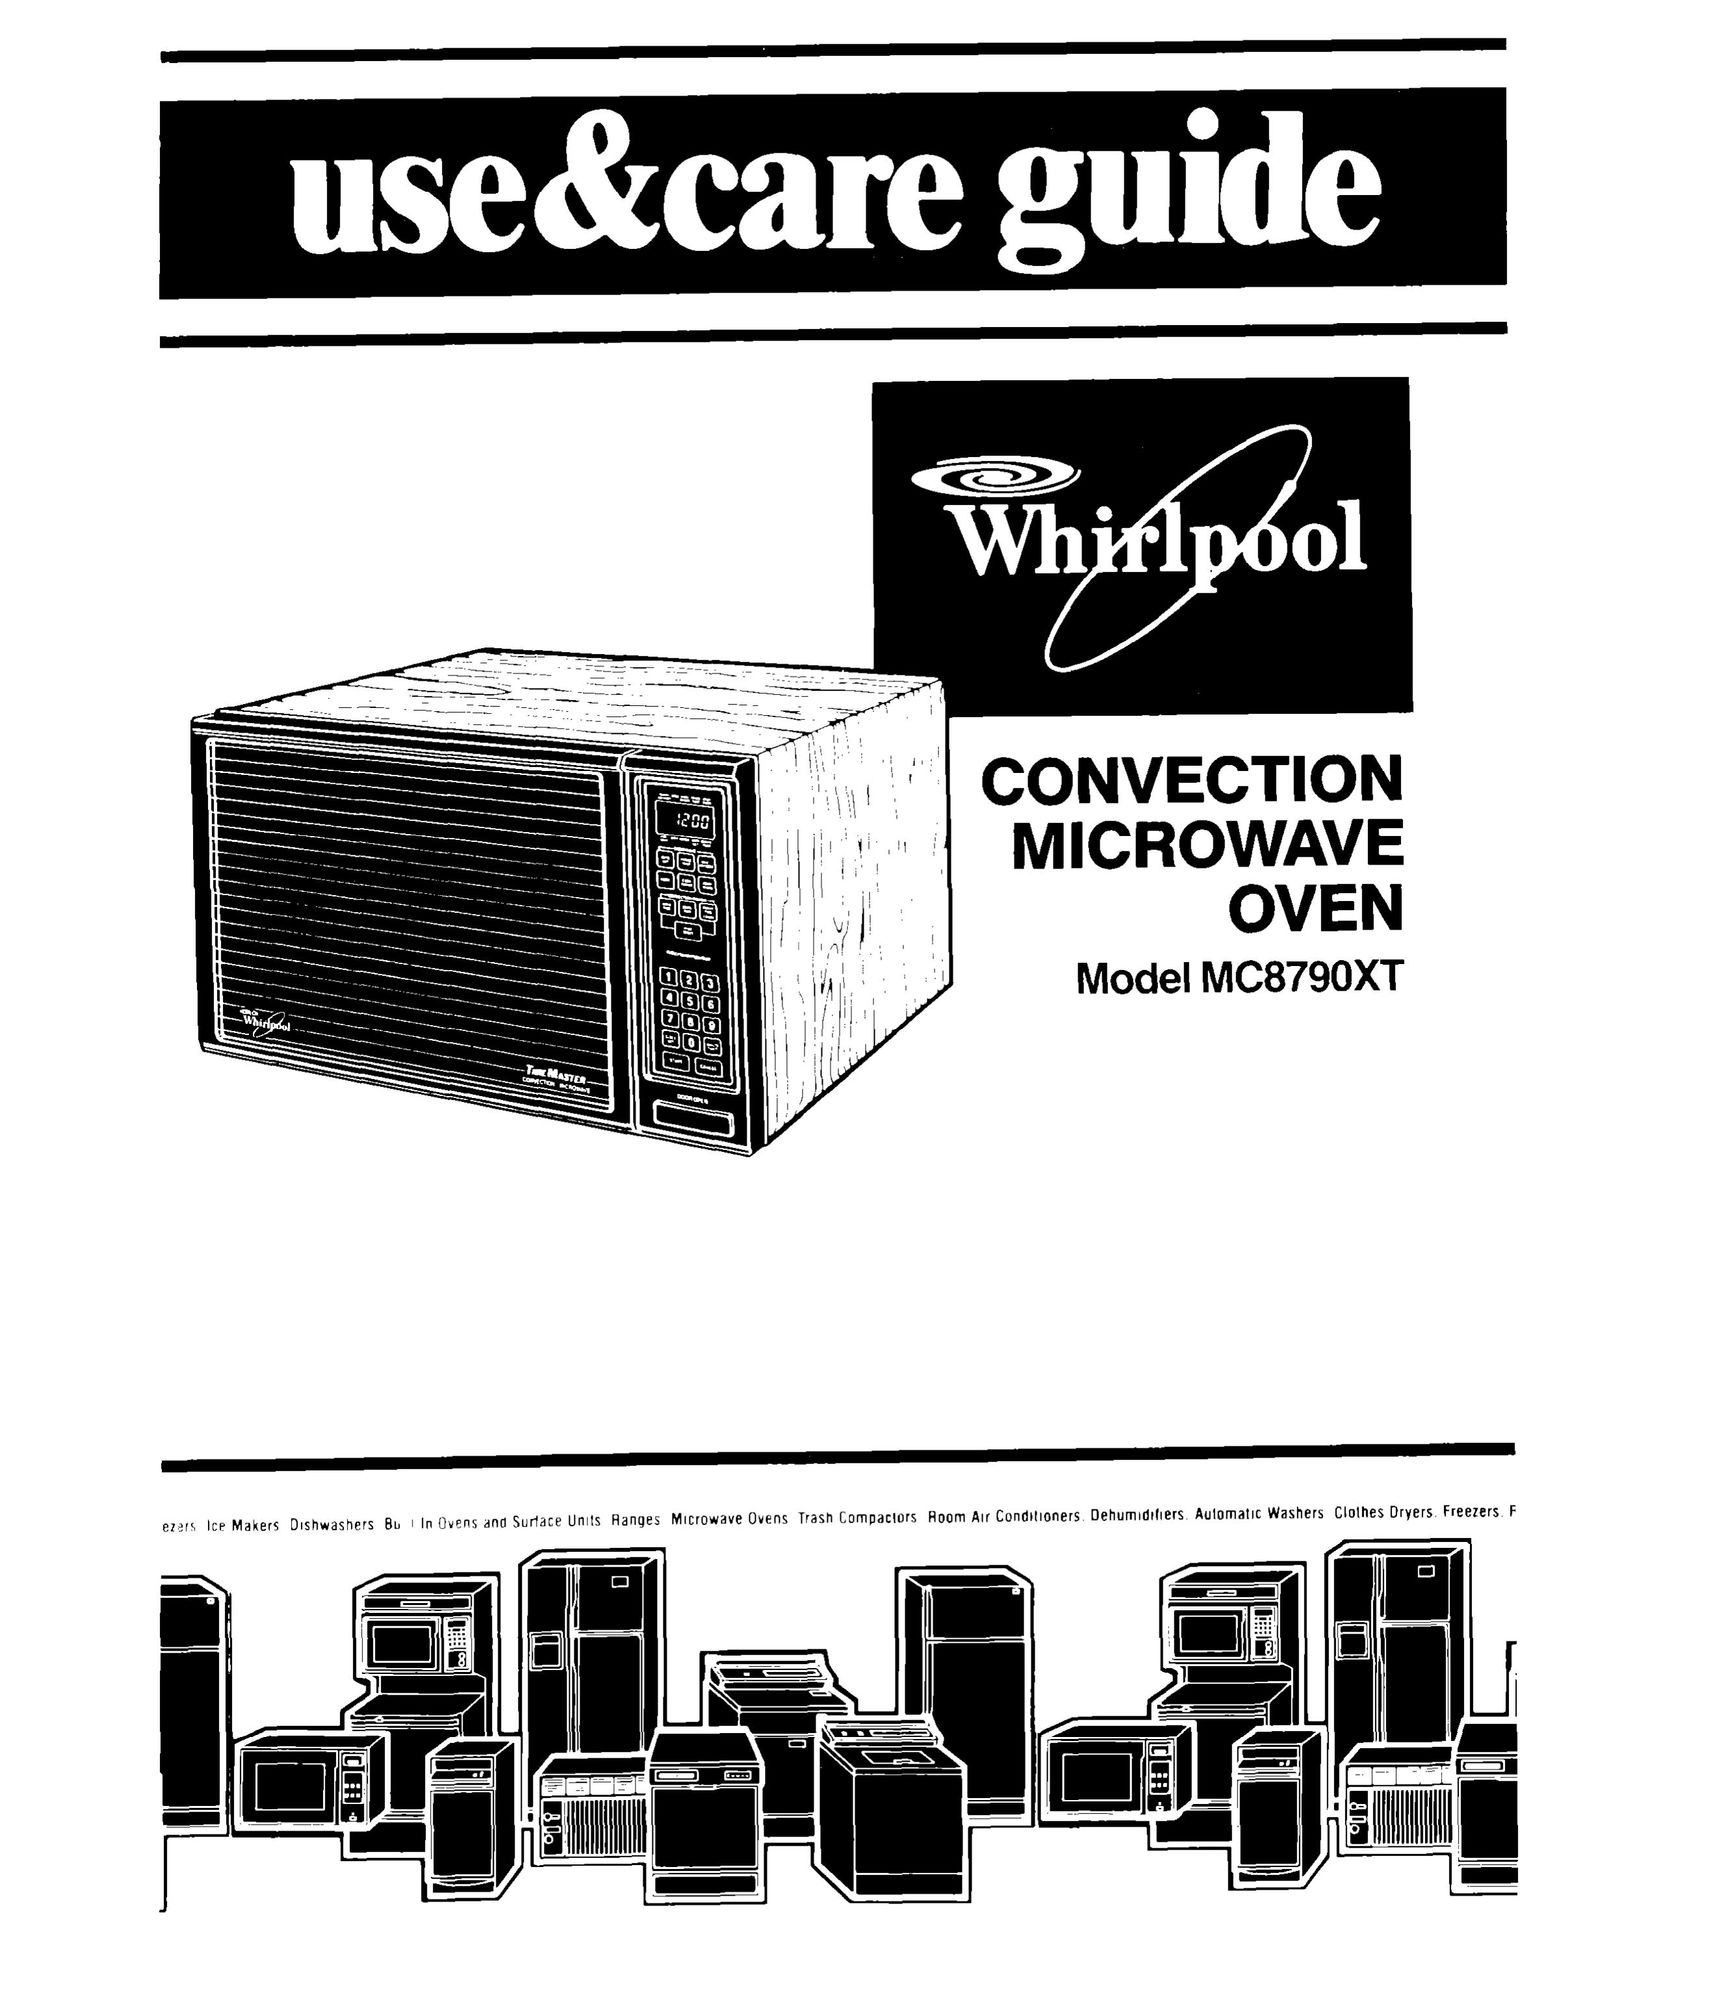 Whirlpool MCB790XT Convection Oven User Manual